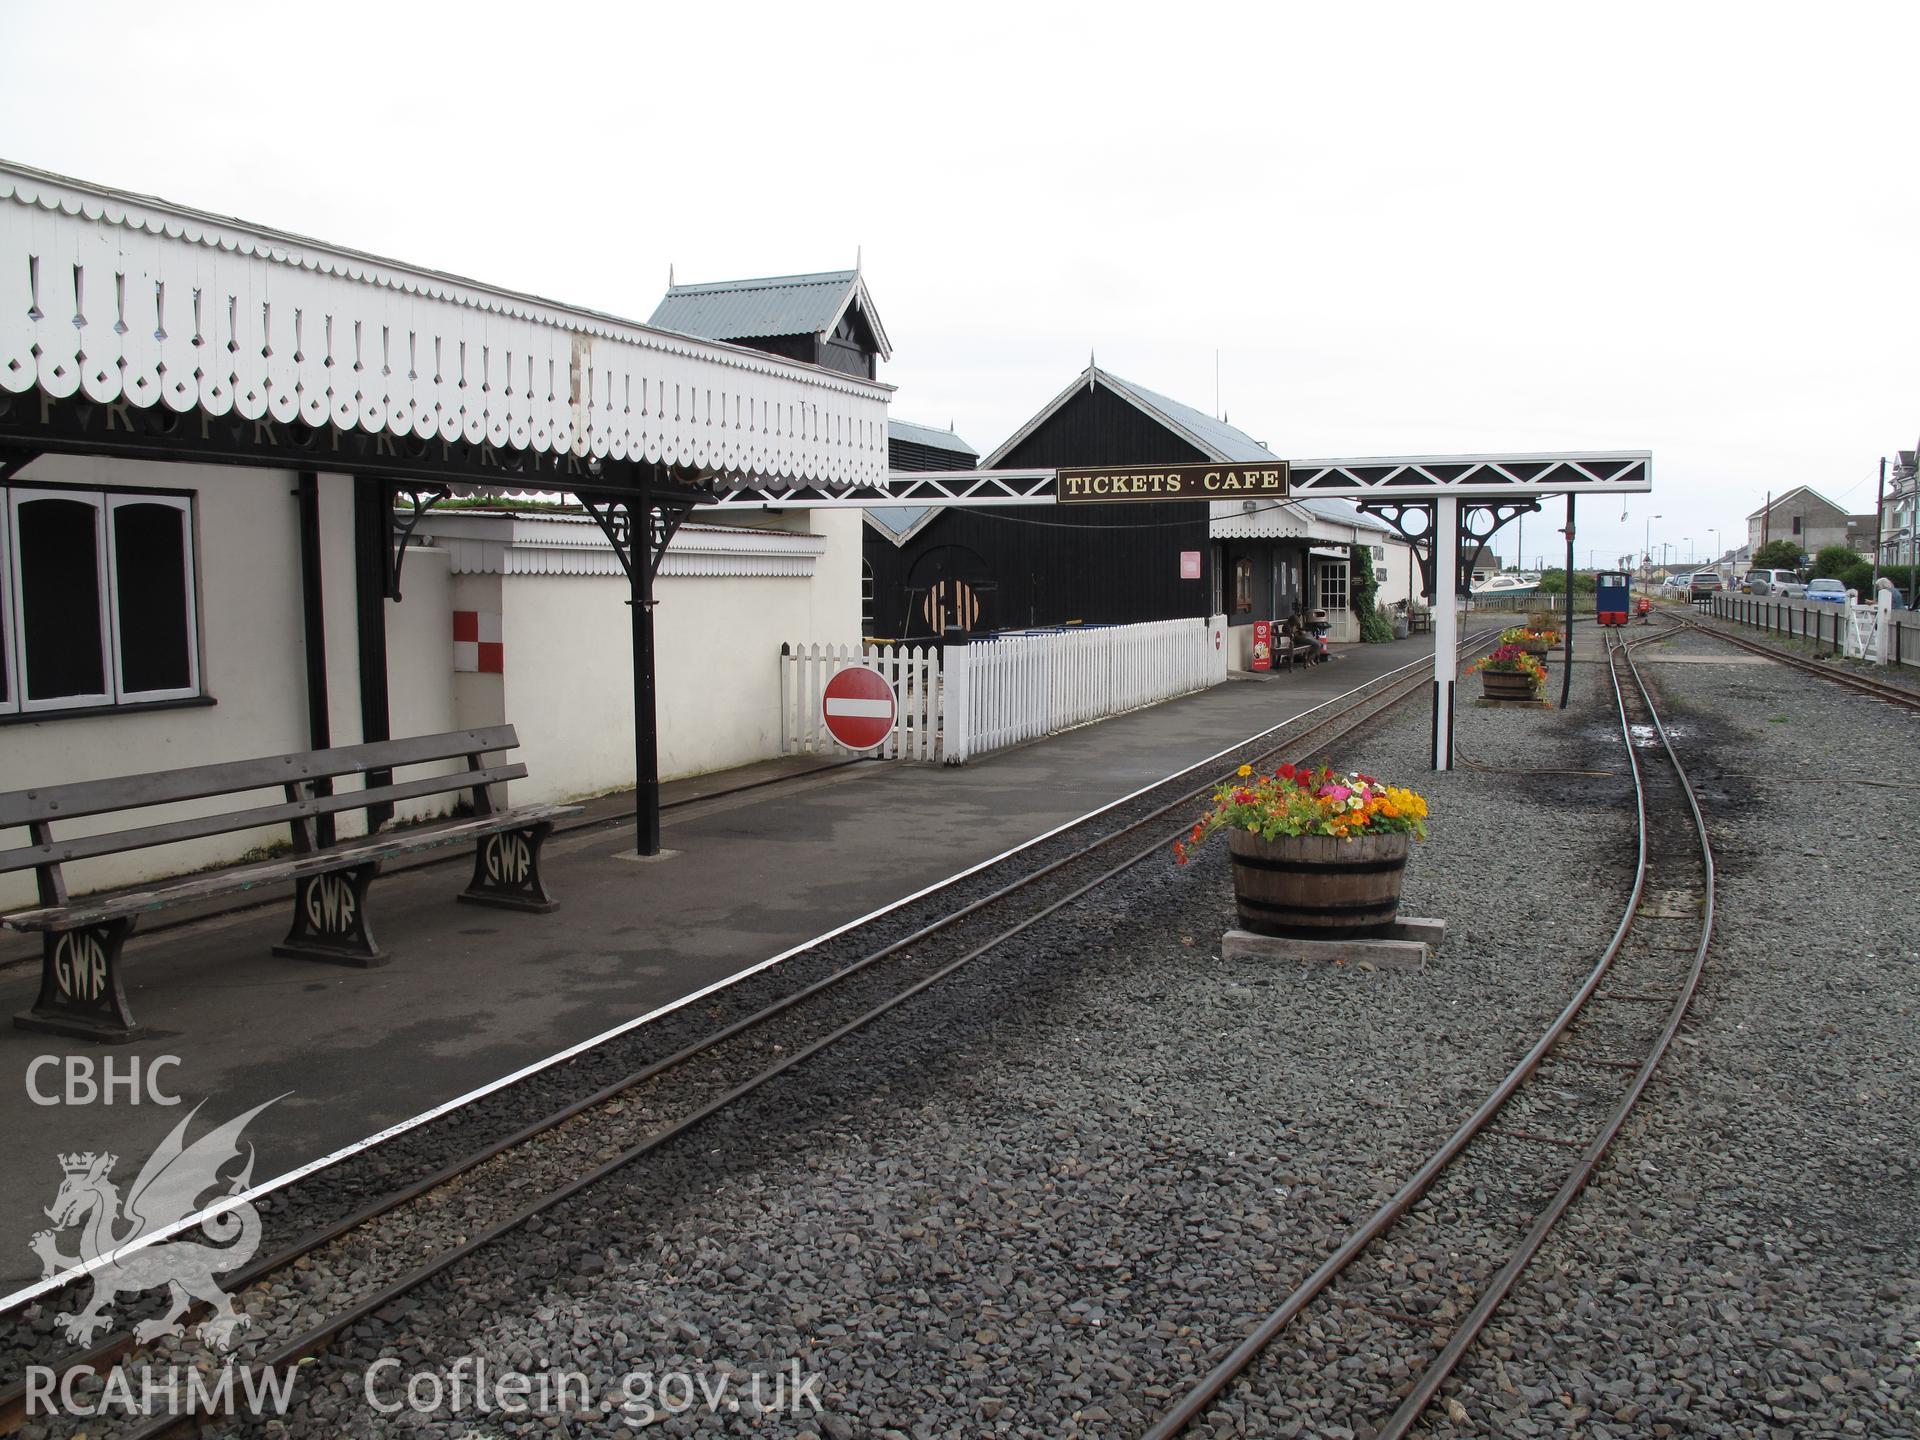 View from the southeast of Fairbourne Station, Fairbourne Railway.